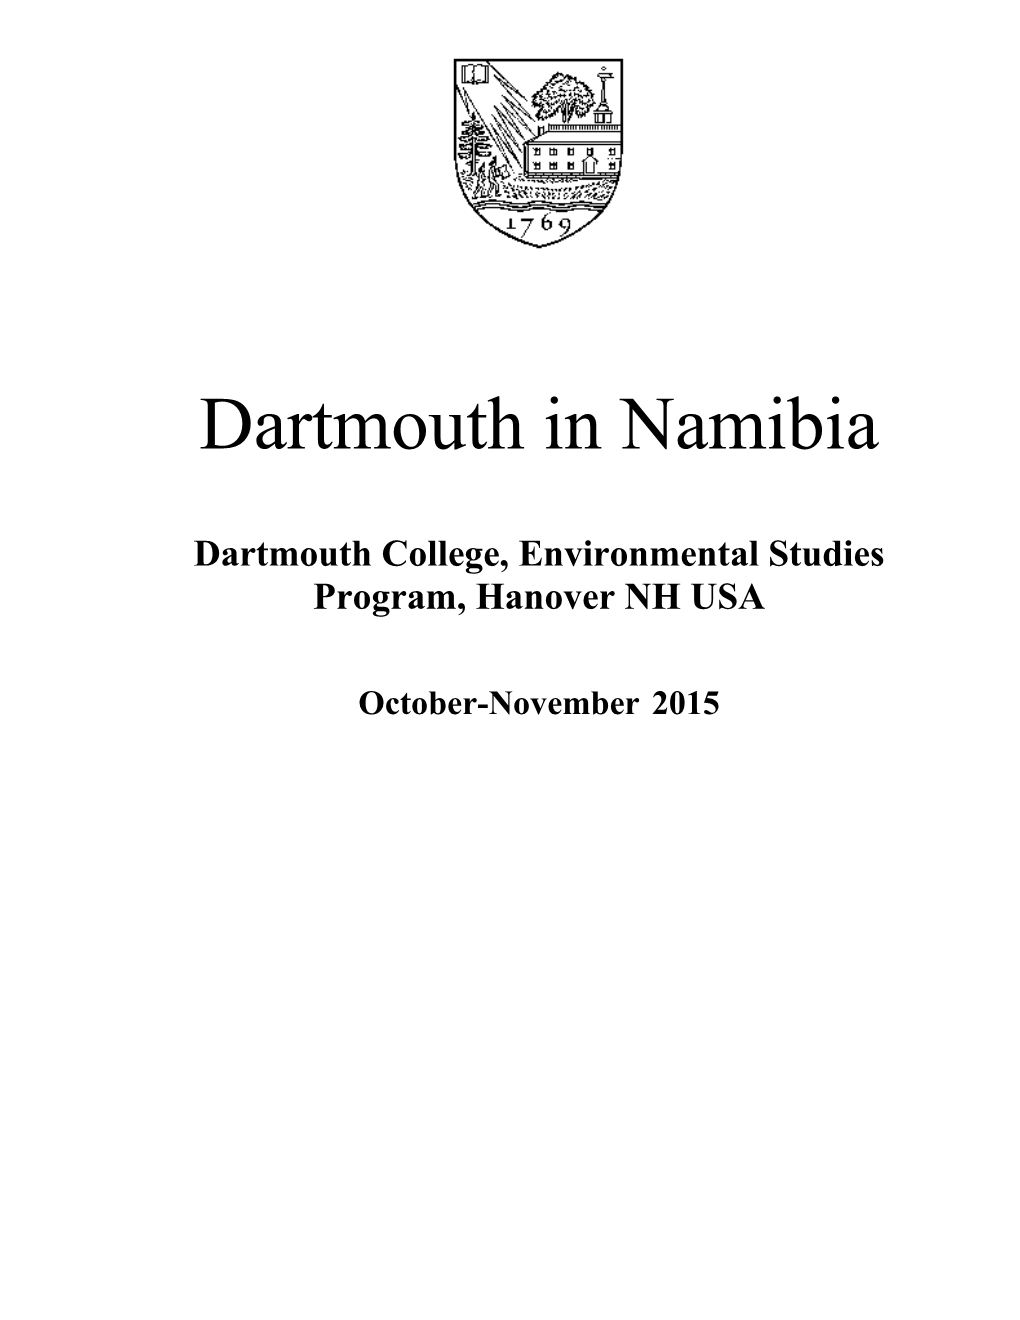 Dartmouth in Namibia ENVS 84 Final Reports 2015